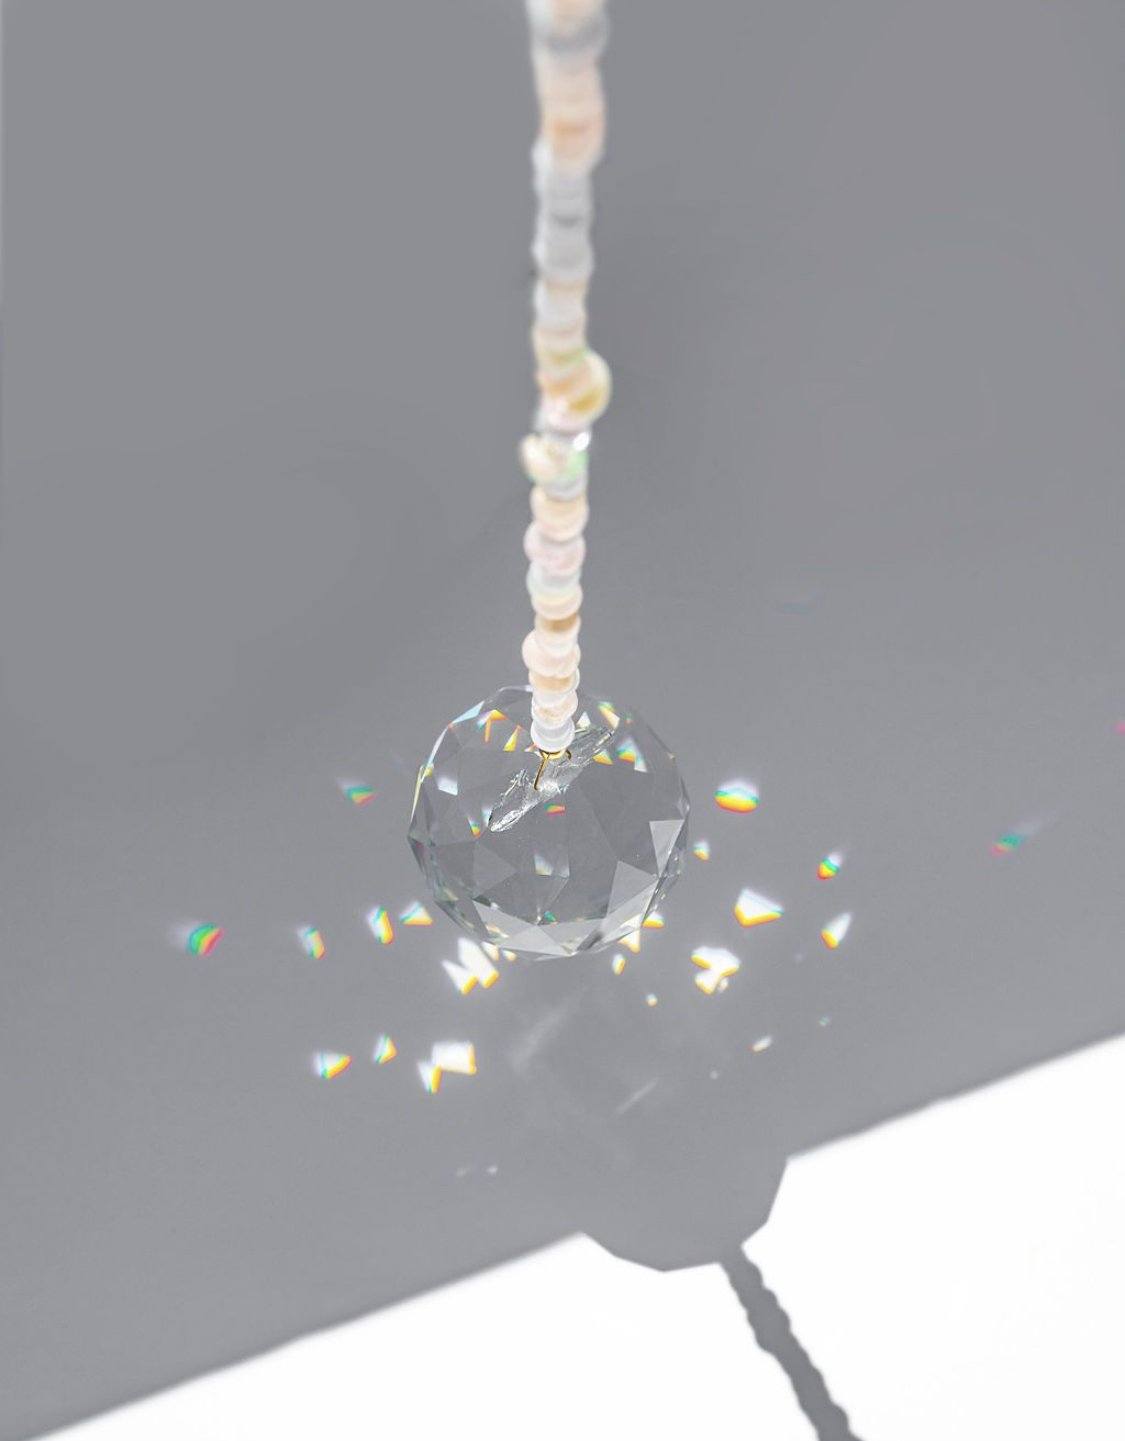 punkwasp by carrie marill window prism - Energize your space with a window prism - hang in a sunny spot & watch the rainbows dance! Hanging Feng Shui window prisms within the home can balance the energy and activate a stale space :: freshwater pearls for an extra dose of harmony.